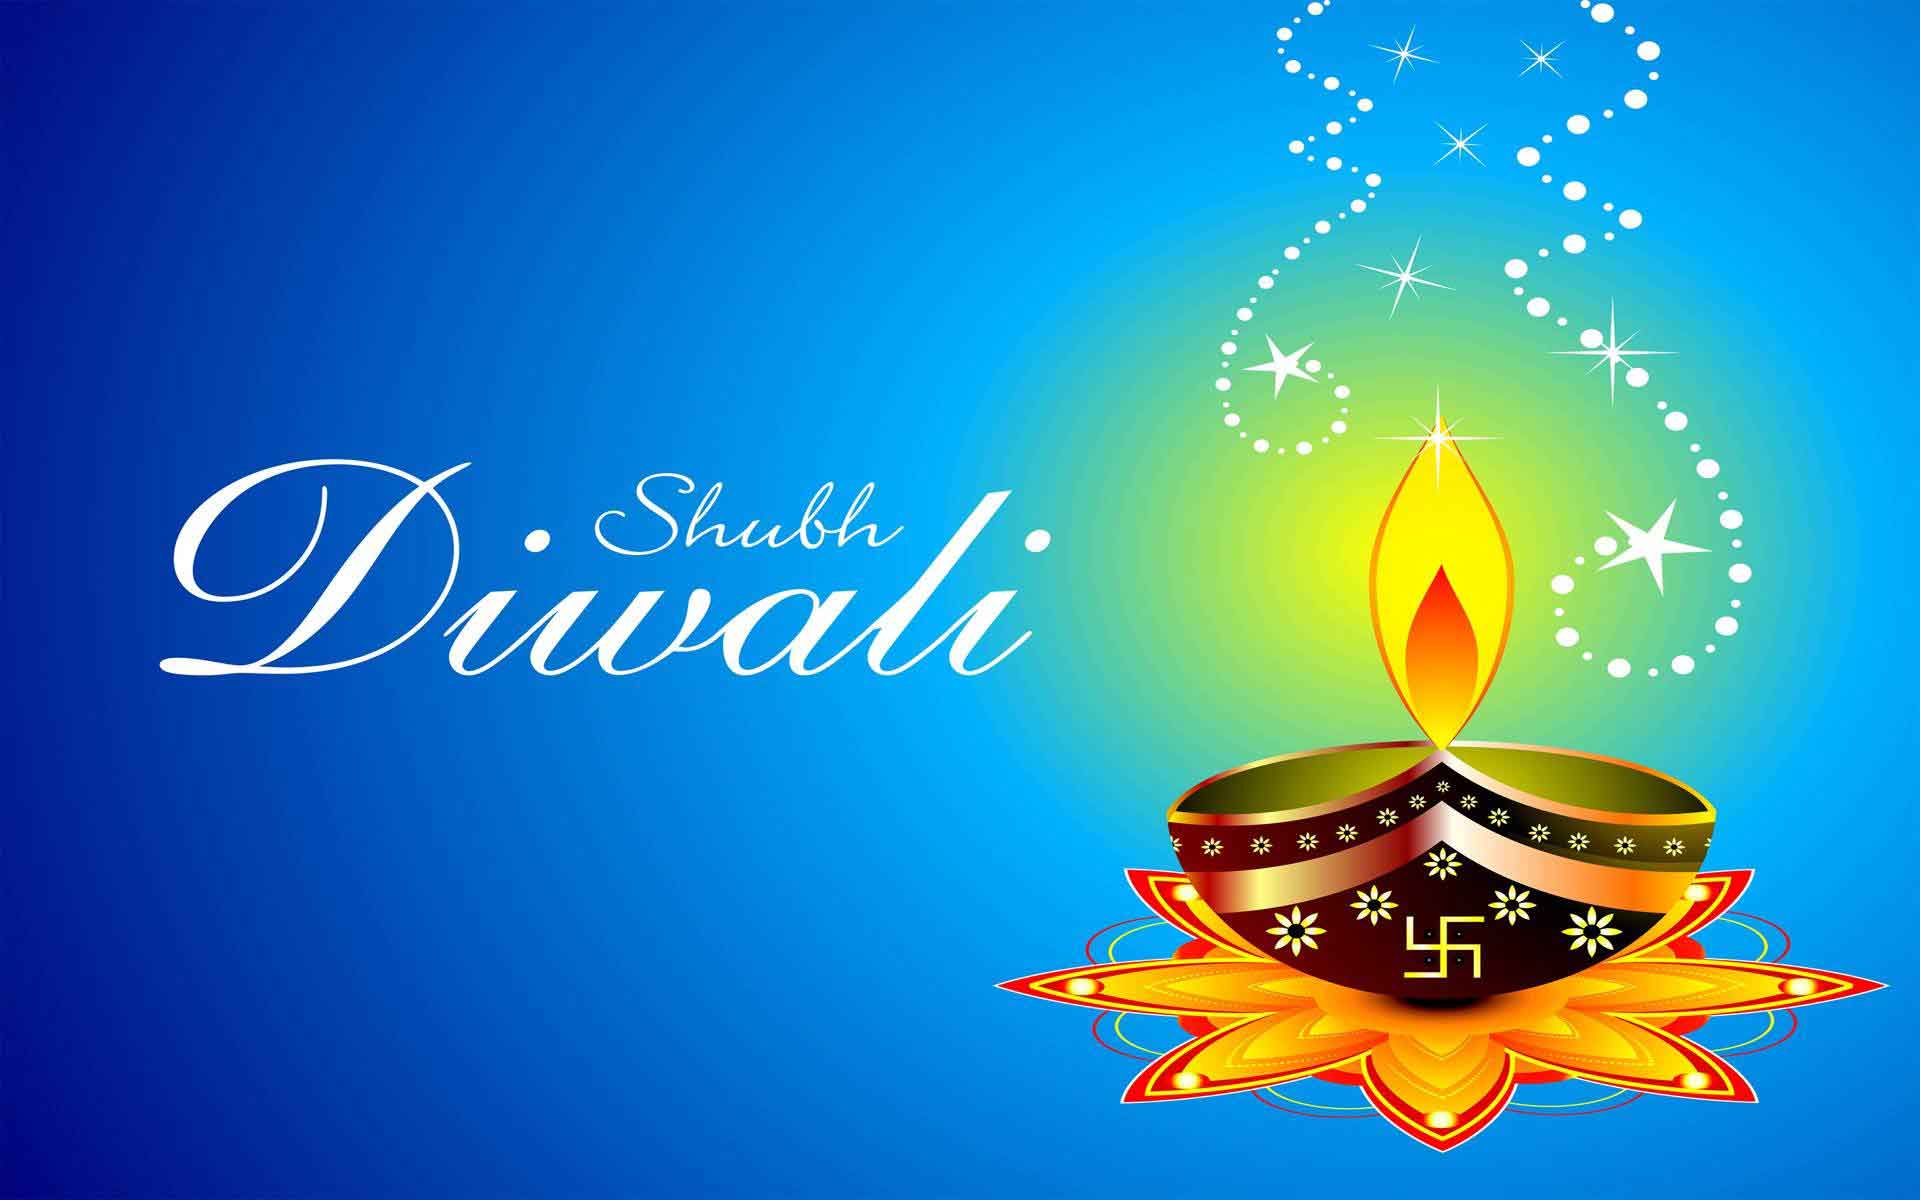 Indian Festival Subh Diwali Background Hd For Mobile Free Download  1920x1200 : 